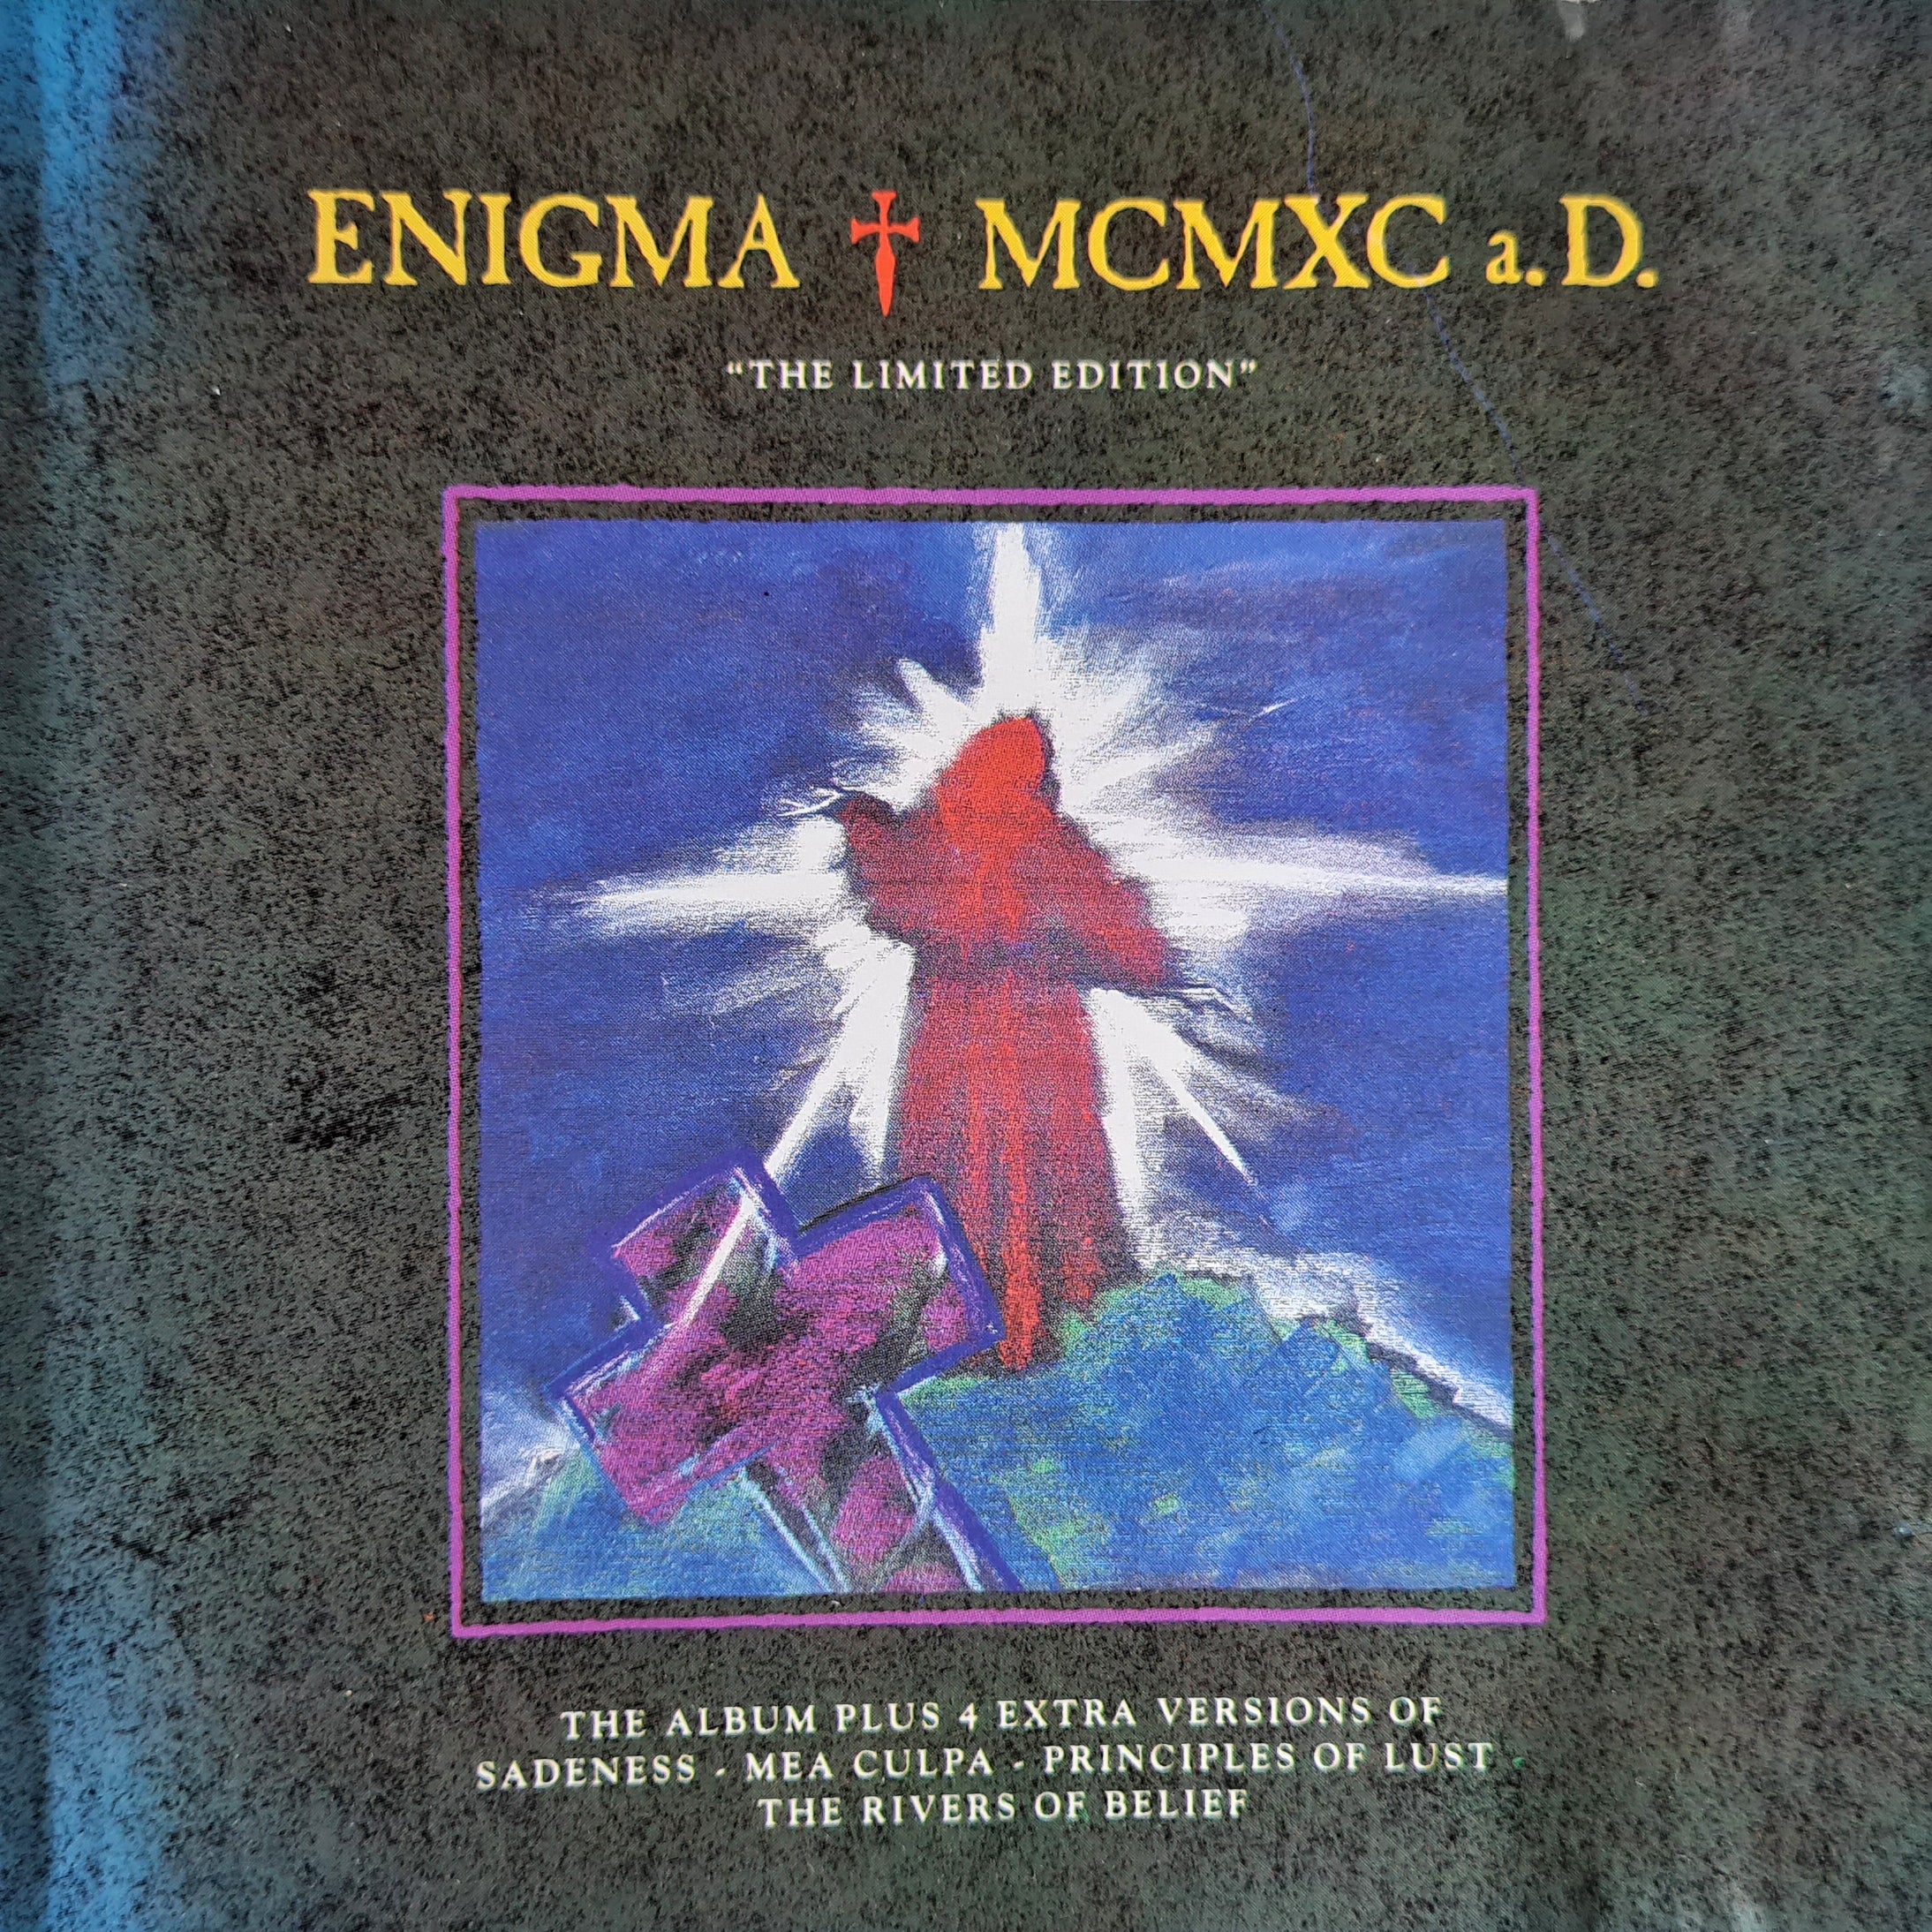 Enigma - MCMXC a.D. (CD)